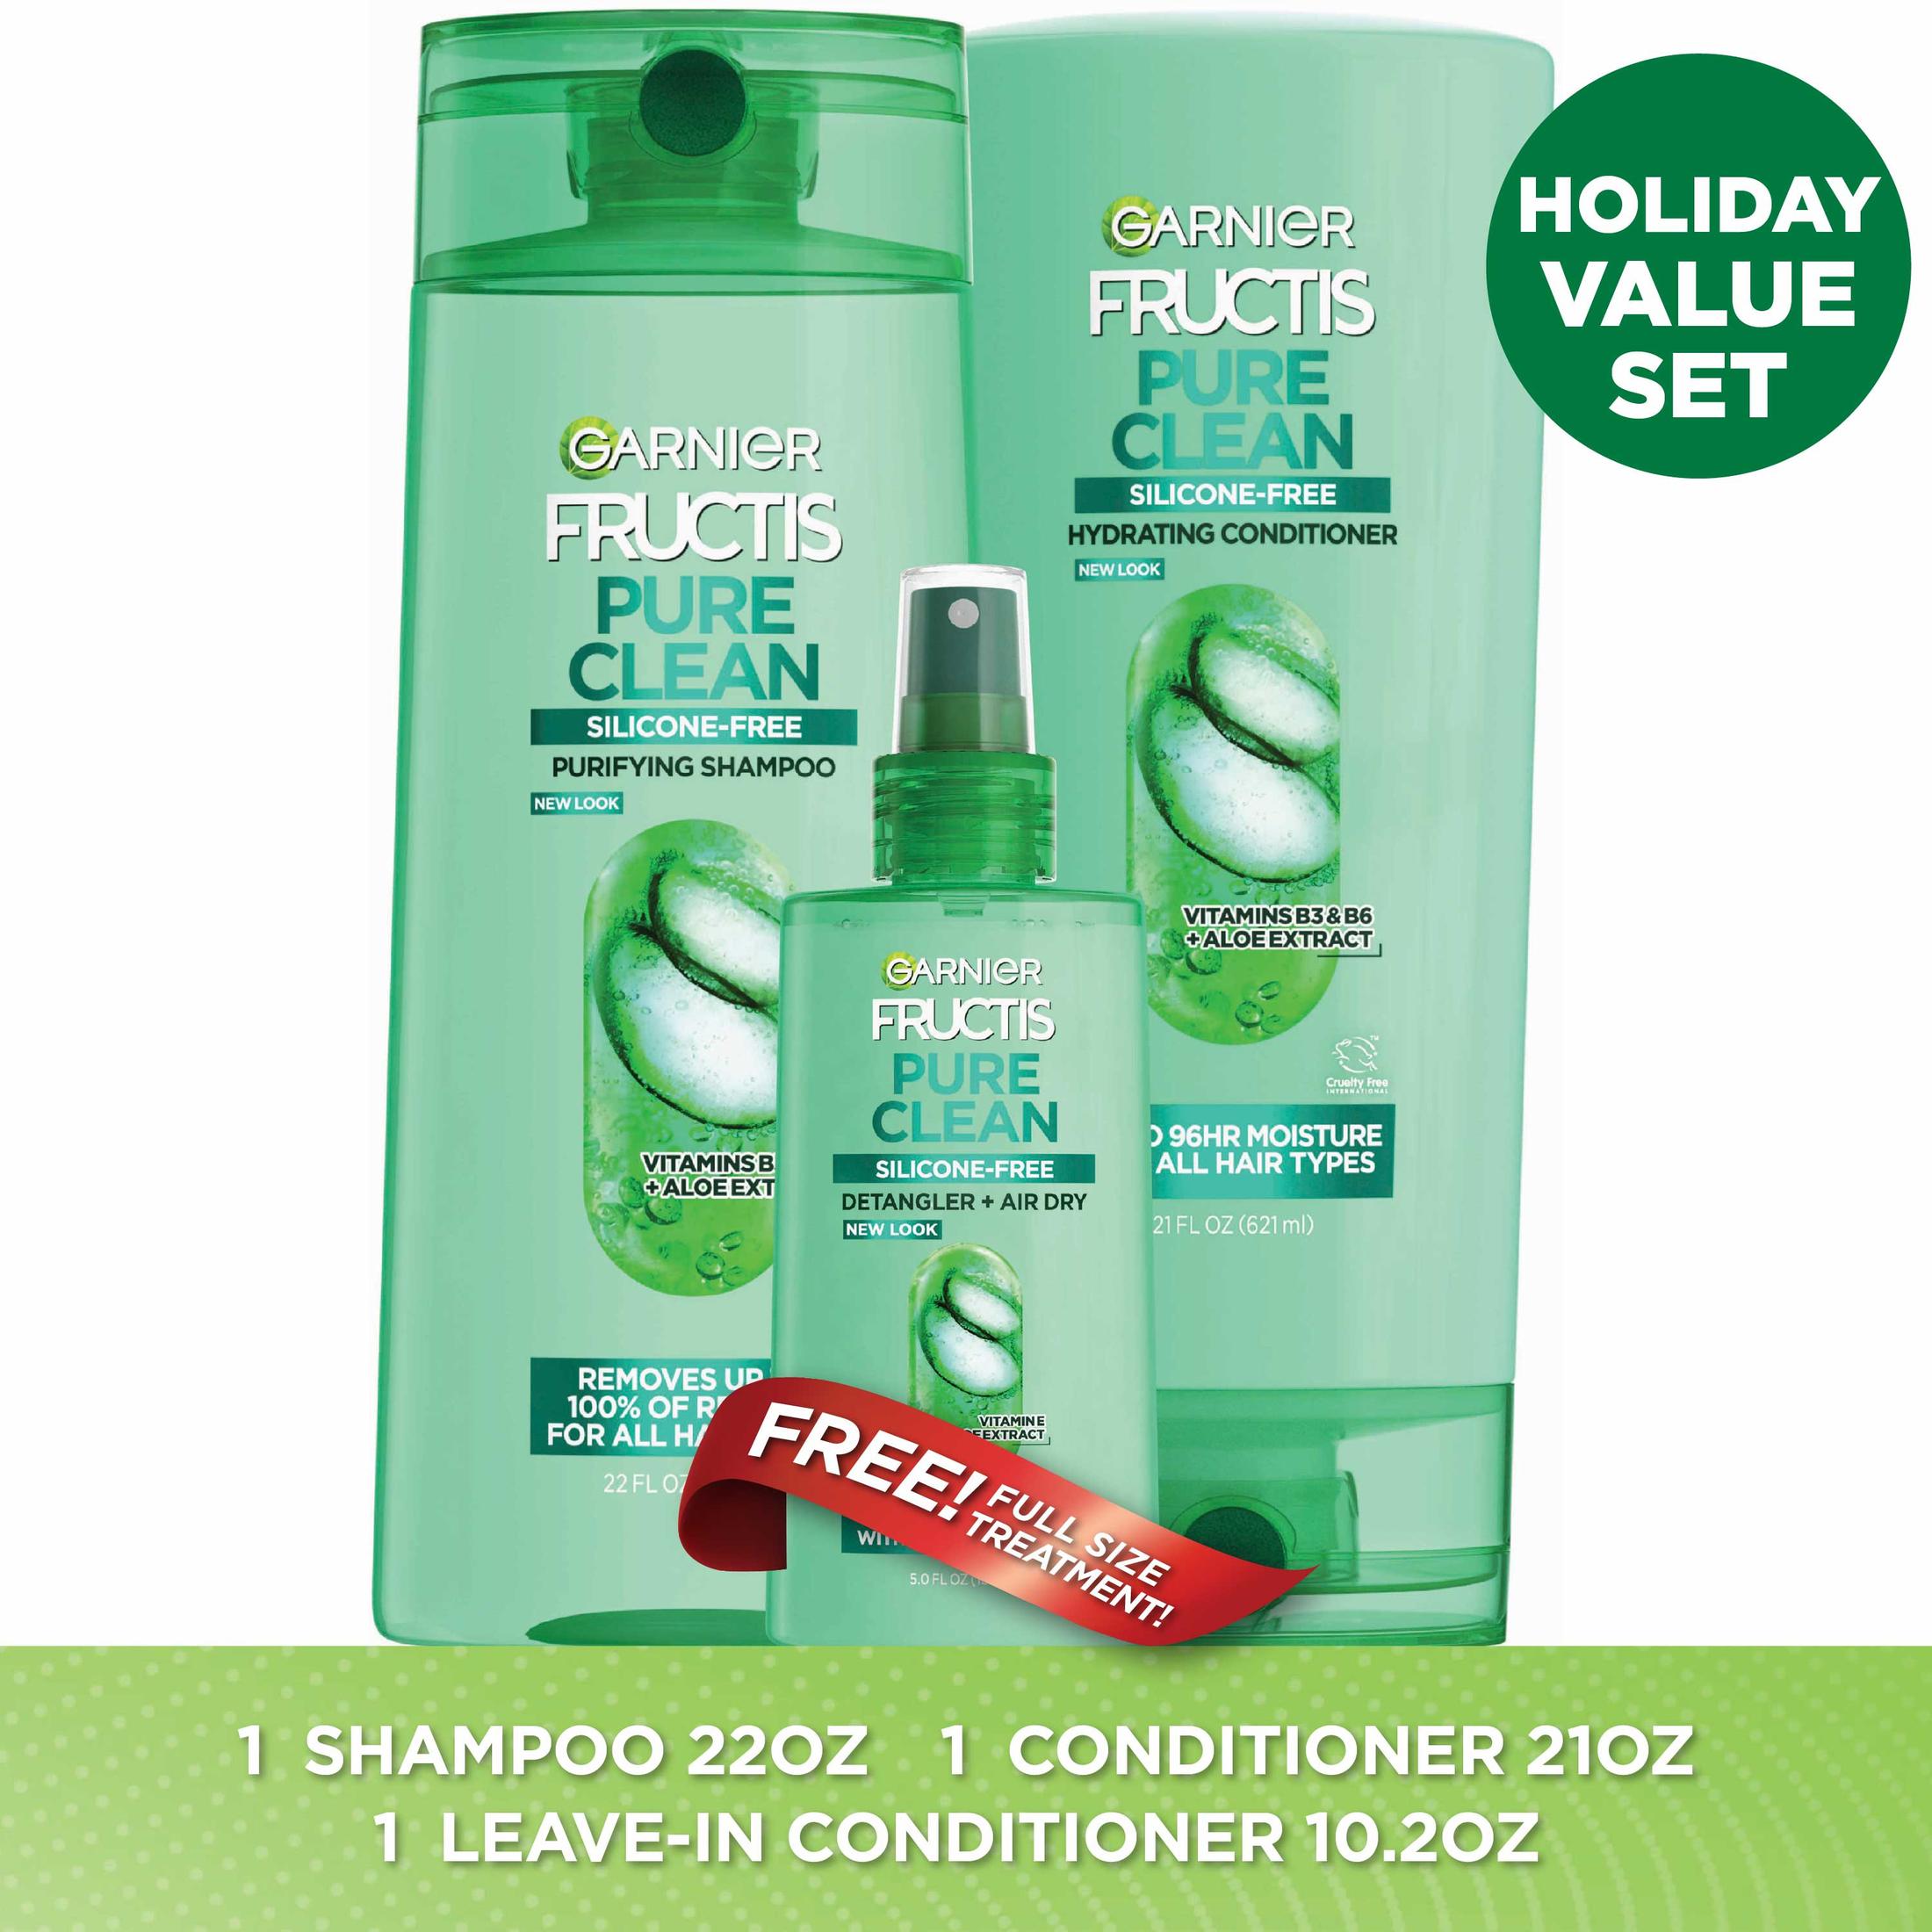 ($18 Value) Garnier Fructis Pure Clean Shampoo Conditioner and Treatment Gift Set, Holiday Kit - image 1 of 9